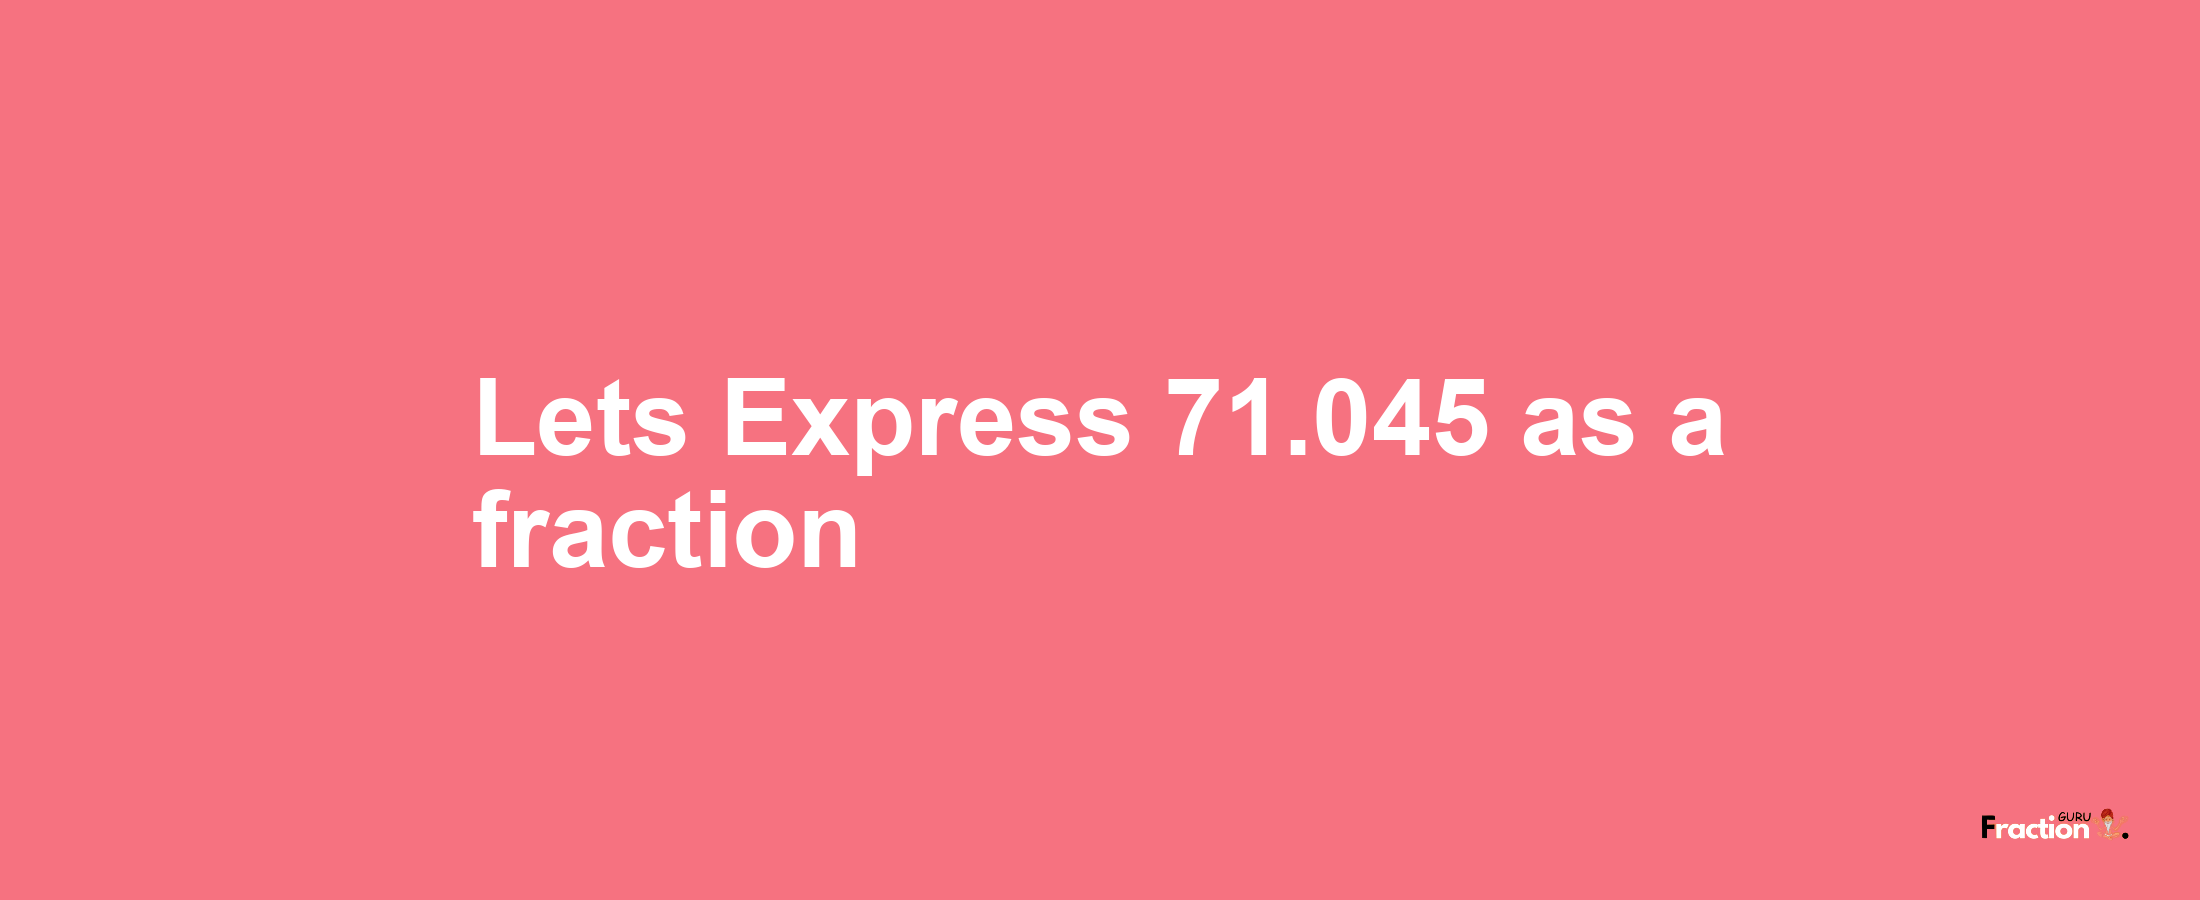 Lets Express 71.045 as afraction